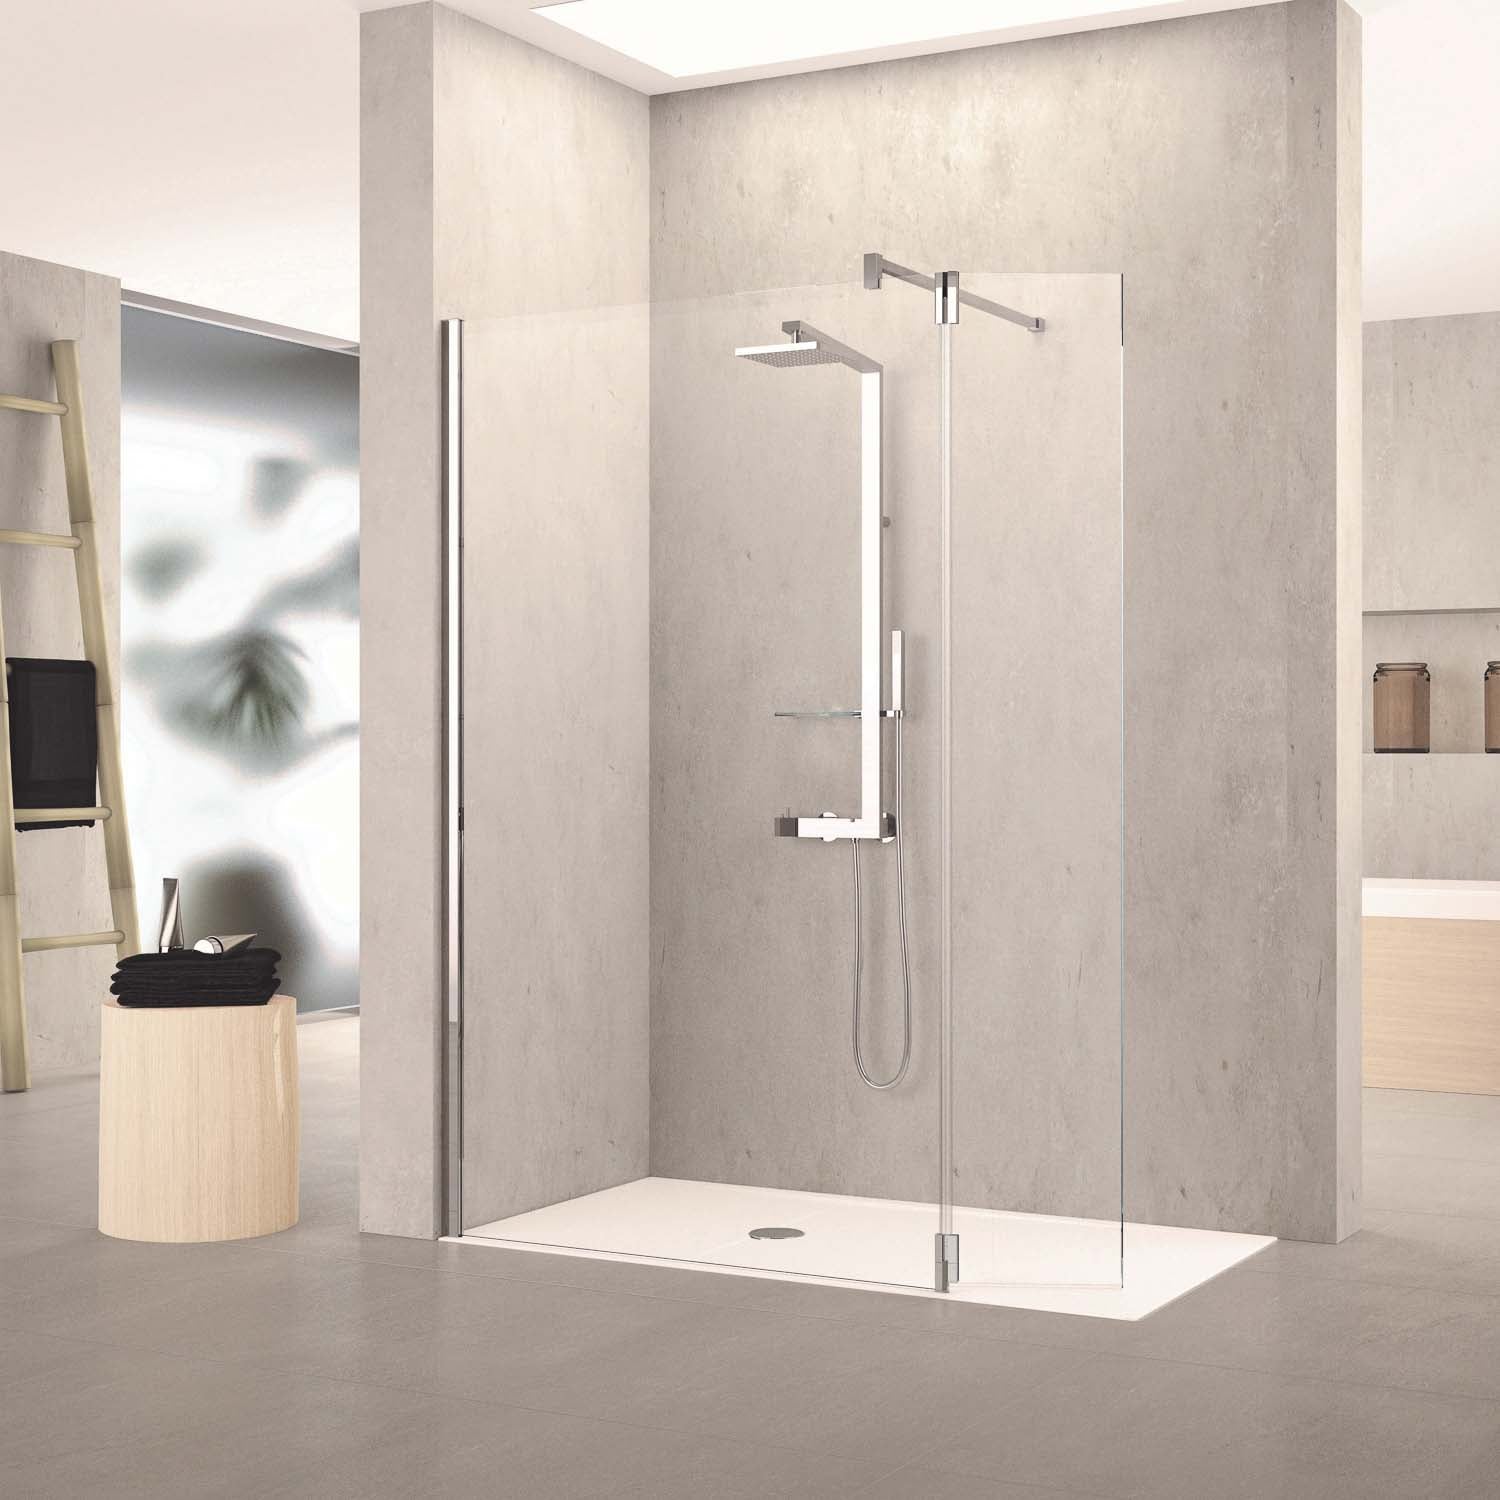 720-750mm Ergo Wet Room Screen Clear Glass with a chrome finish lifestyle image